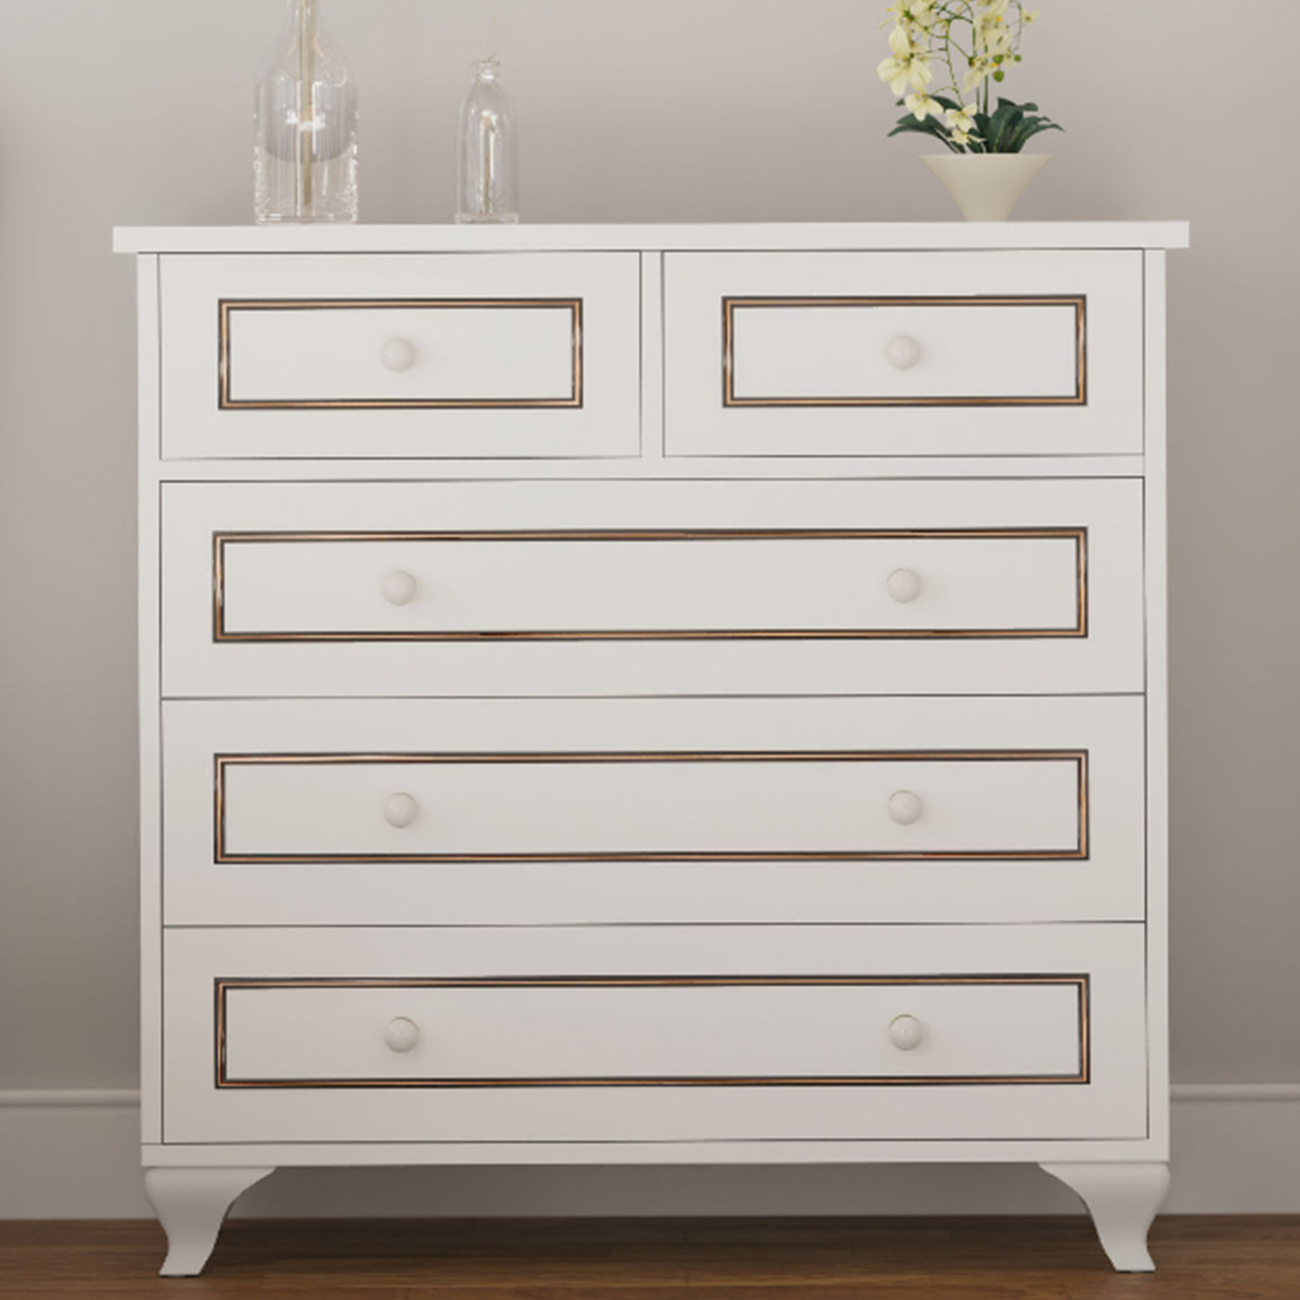 Evu CLEMENT 5 Drawer White Chest of Drawers Image 1